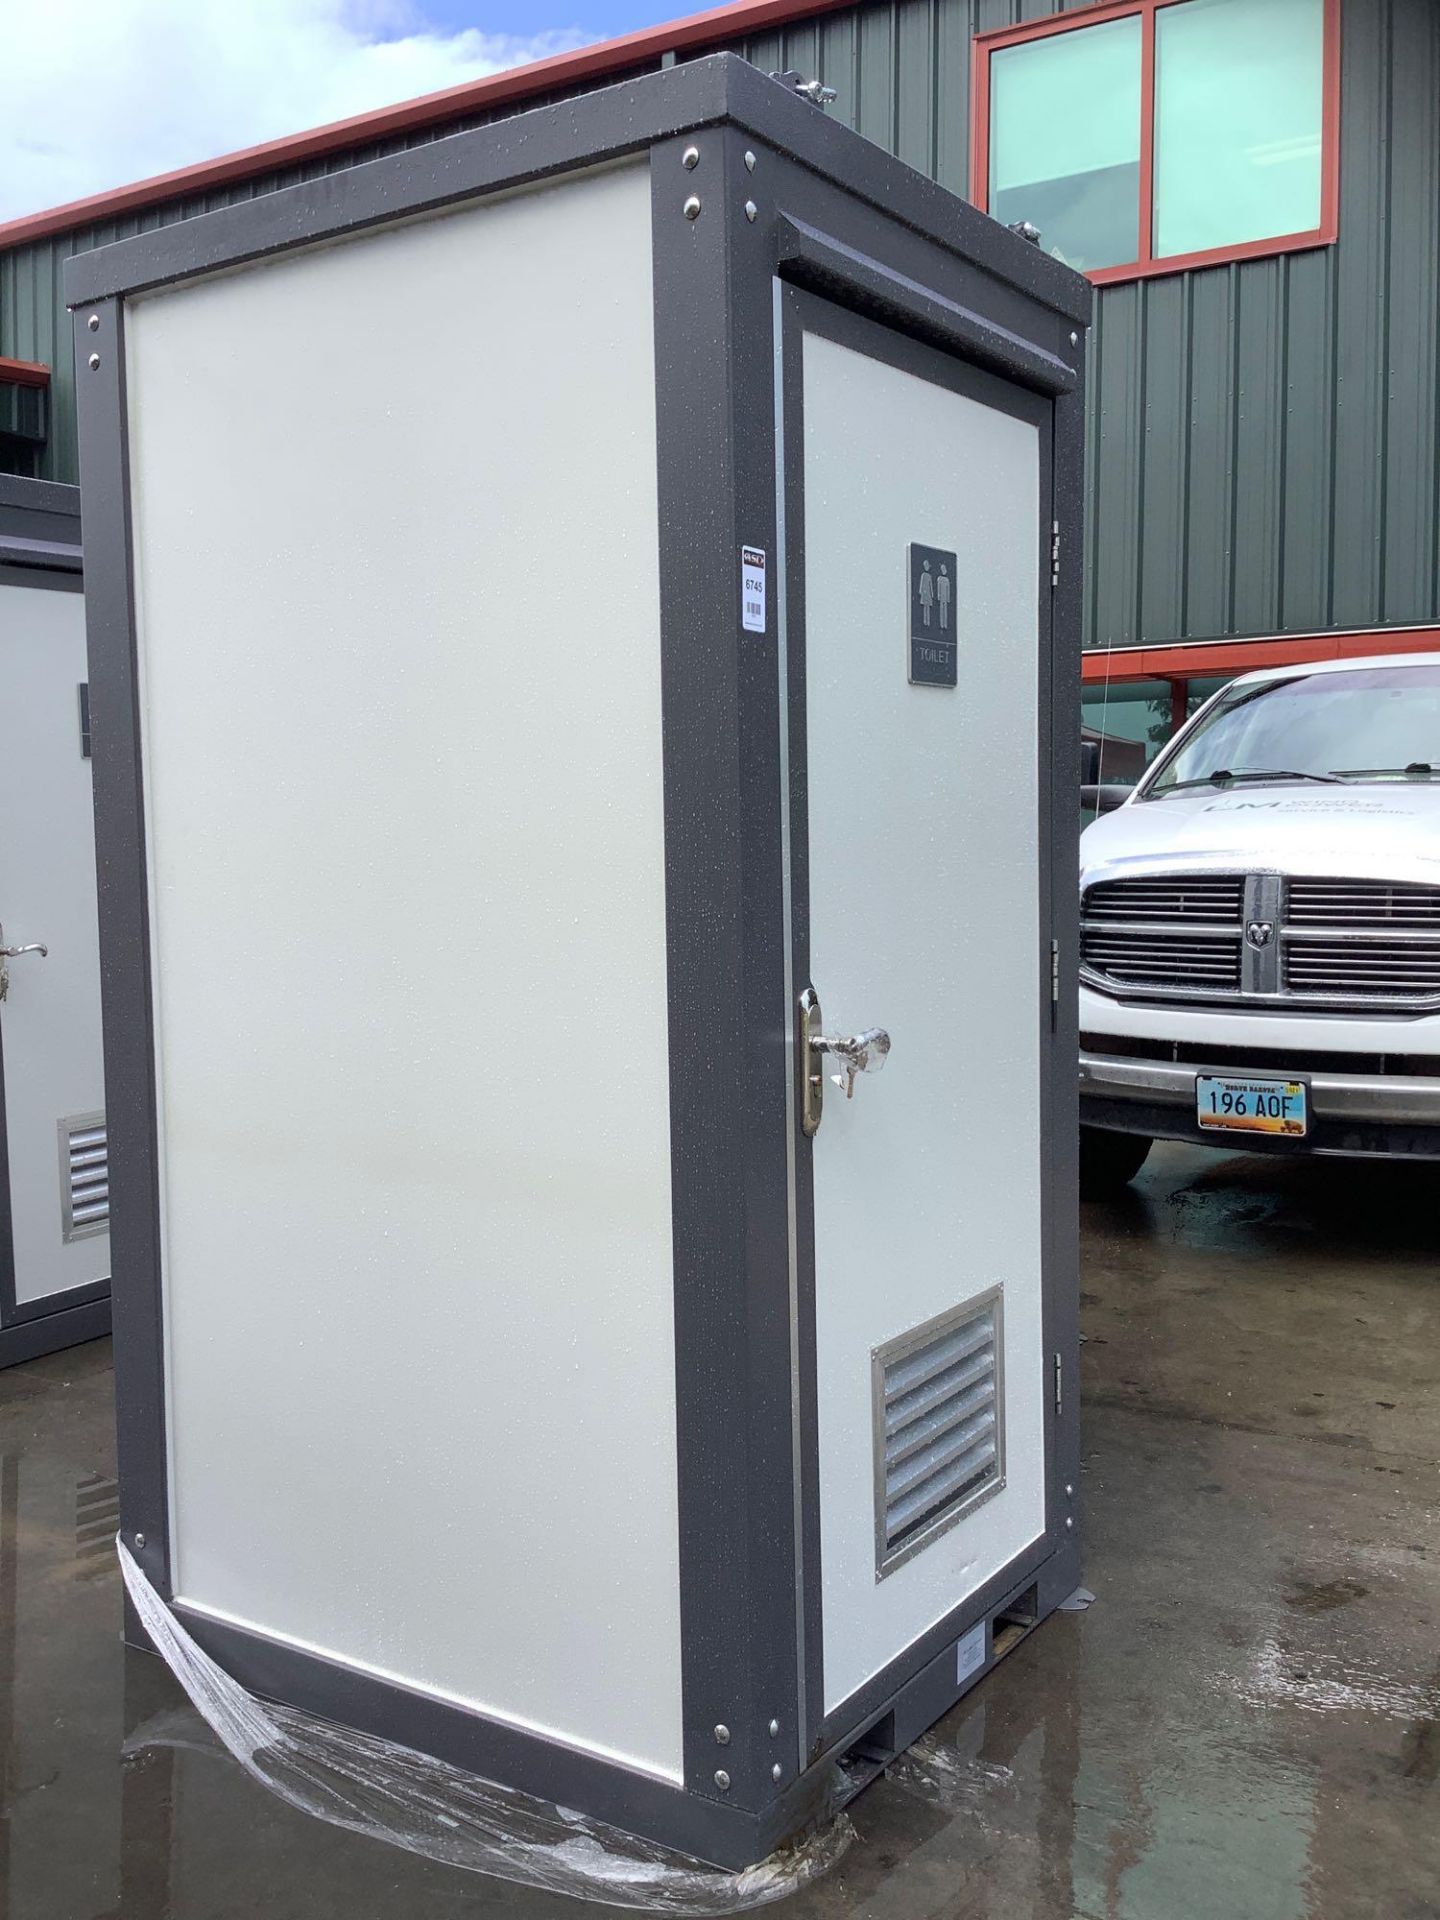 UNUSED PORTABLE SINGLE BATHROOM UNIT, 1 STALL, ELECTRIC & PLUMBING HOOK UP WITH EXTERIOR PLUMBING CO - Image 2 of 7